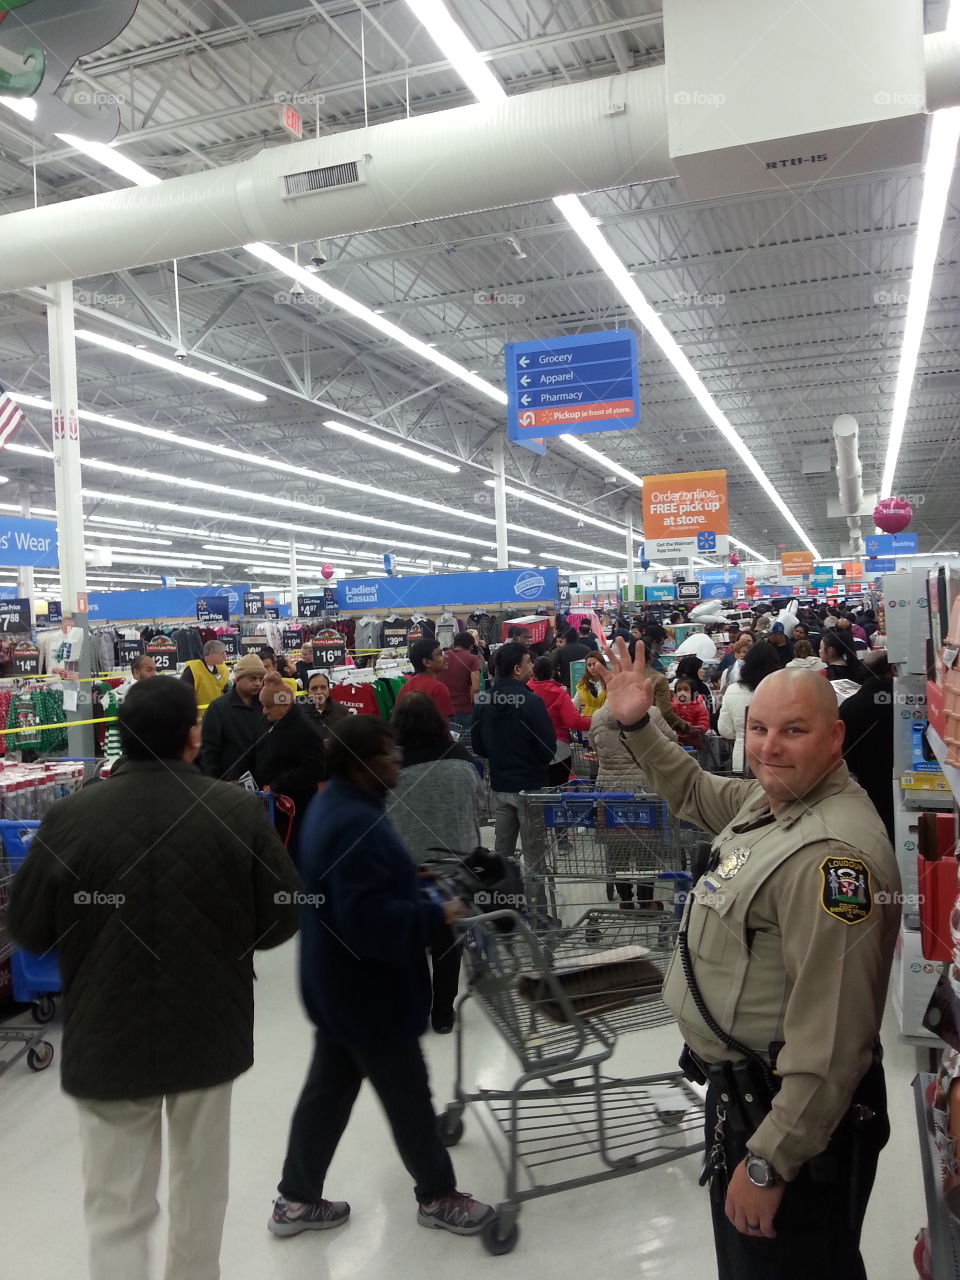 Even the Cop waved at the start of the madness! (pre -black Friday sale)